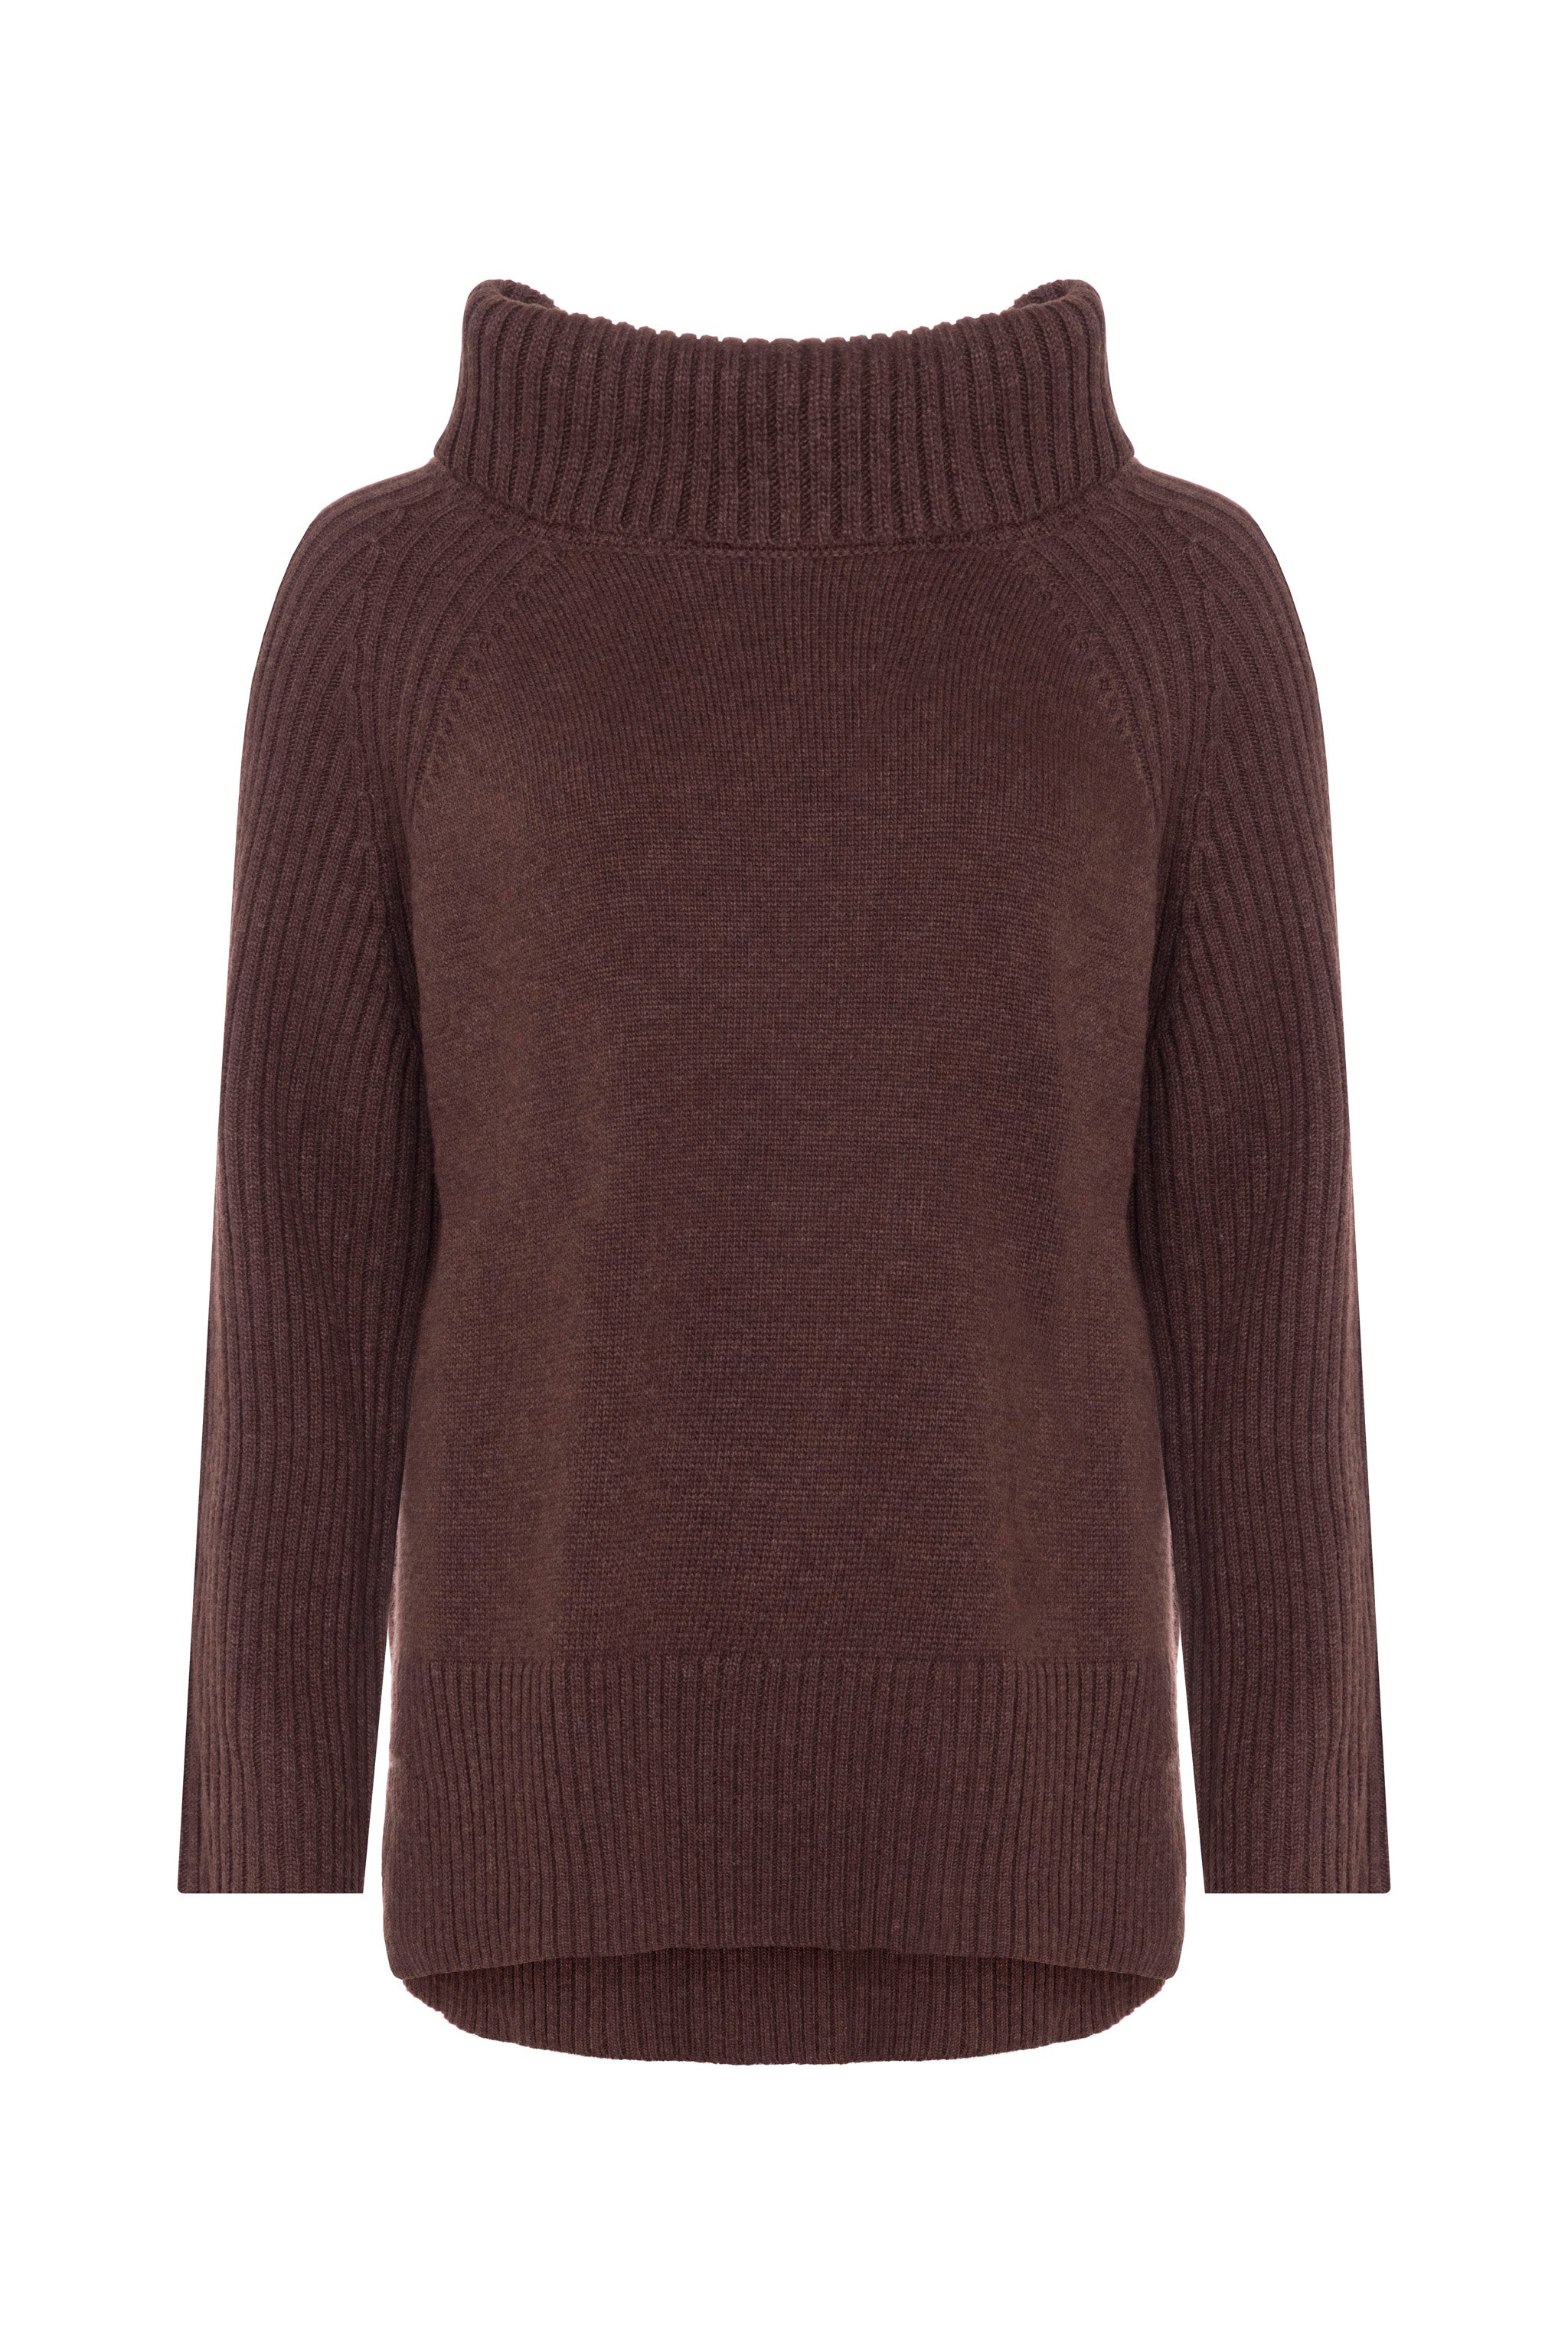 Oversized Cashmere Blend Roll Neck (Chocolate)